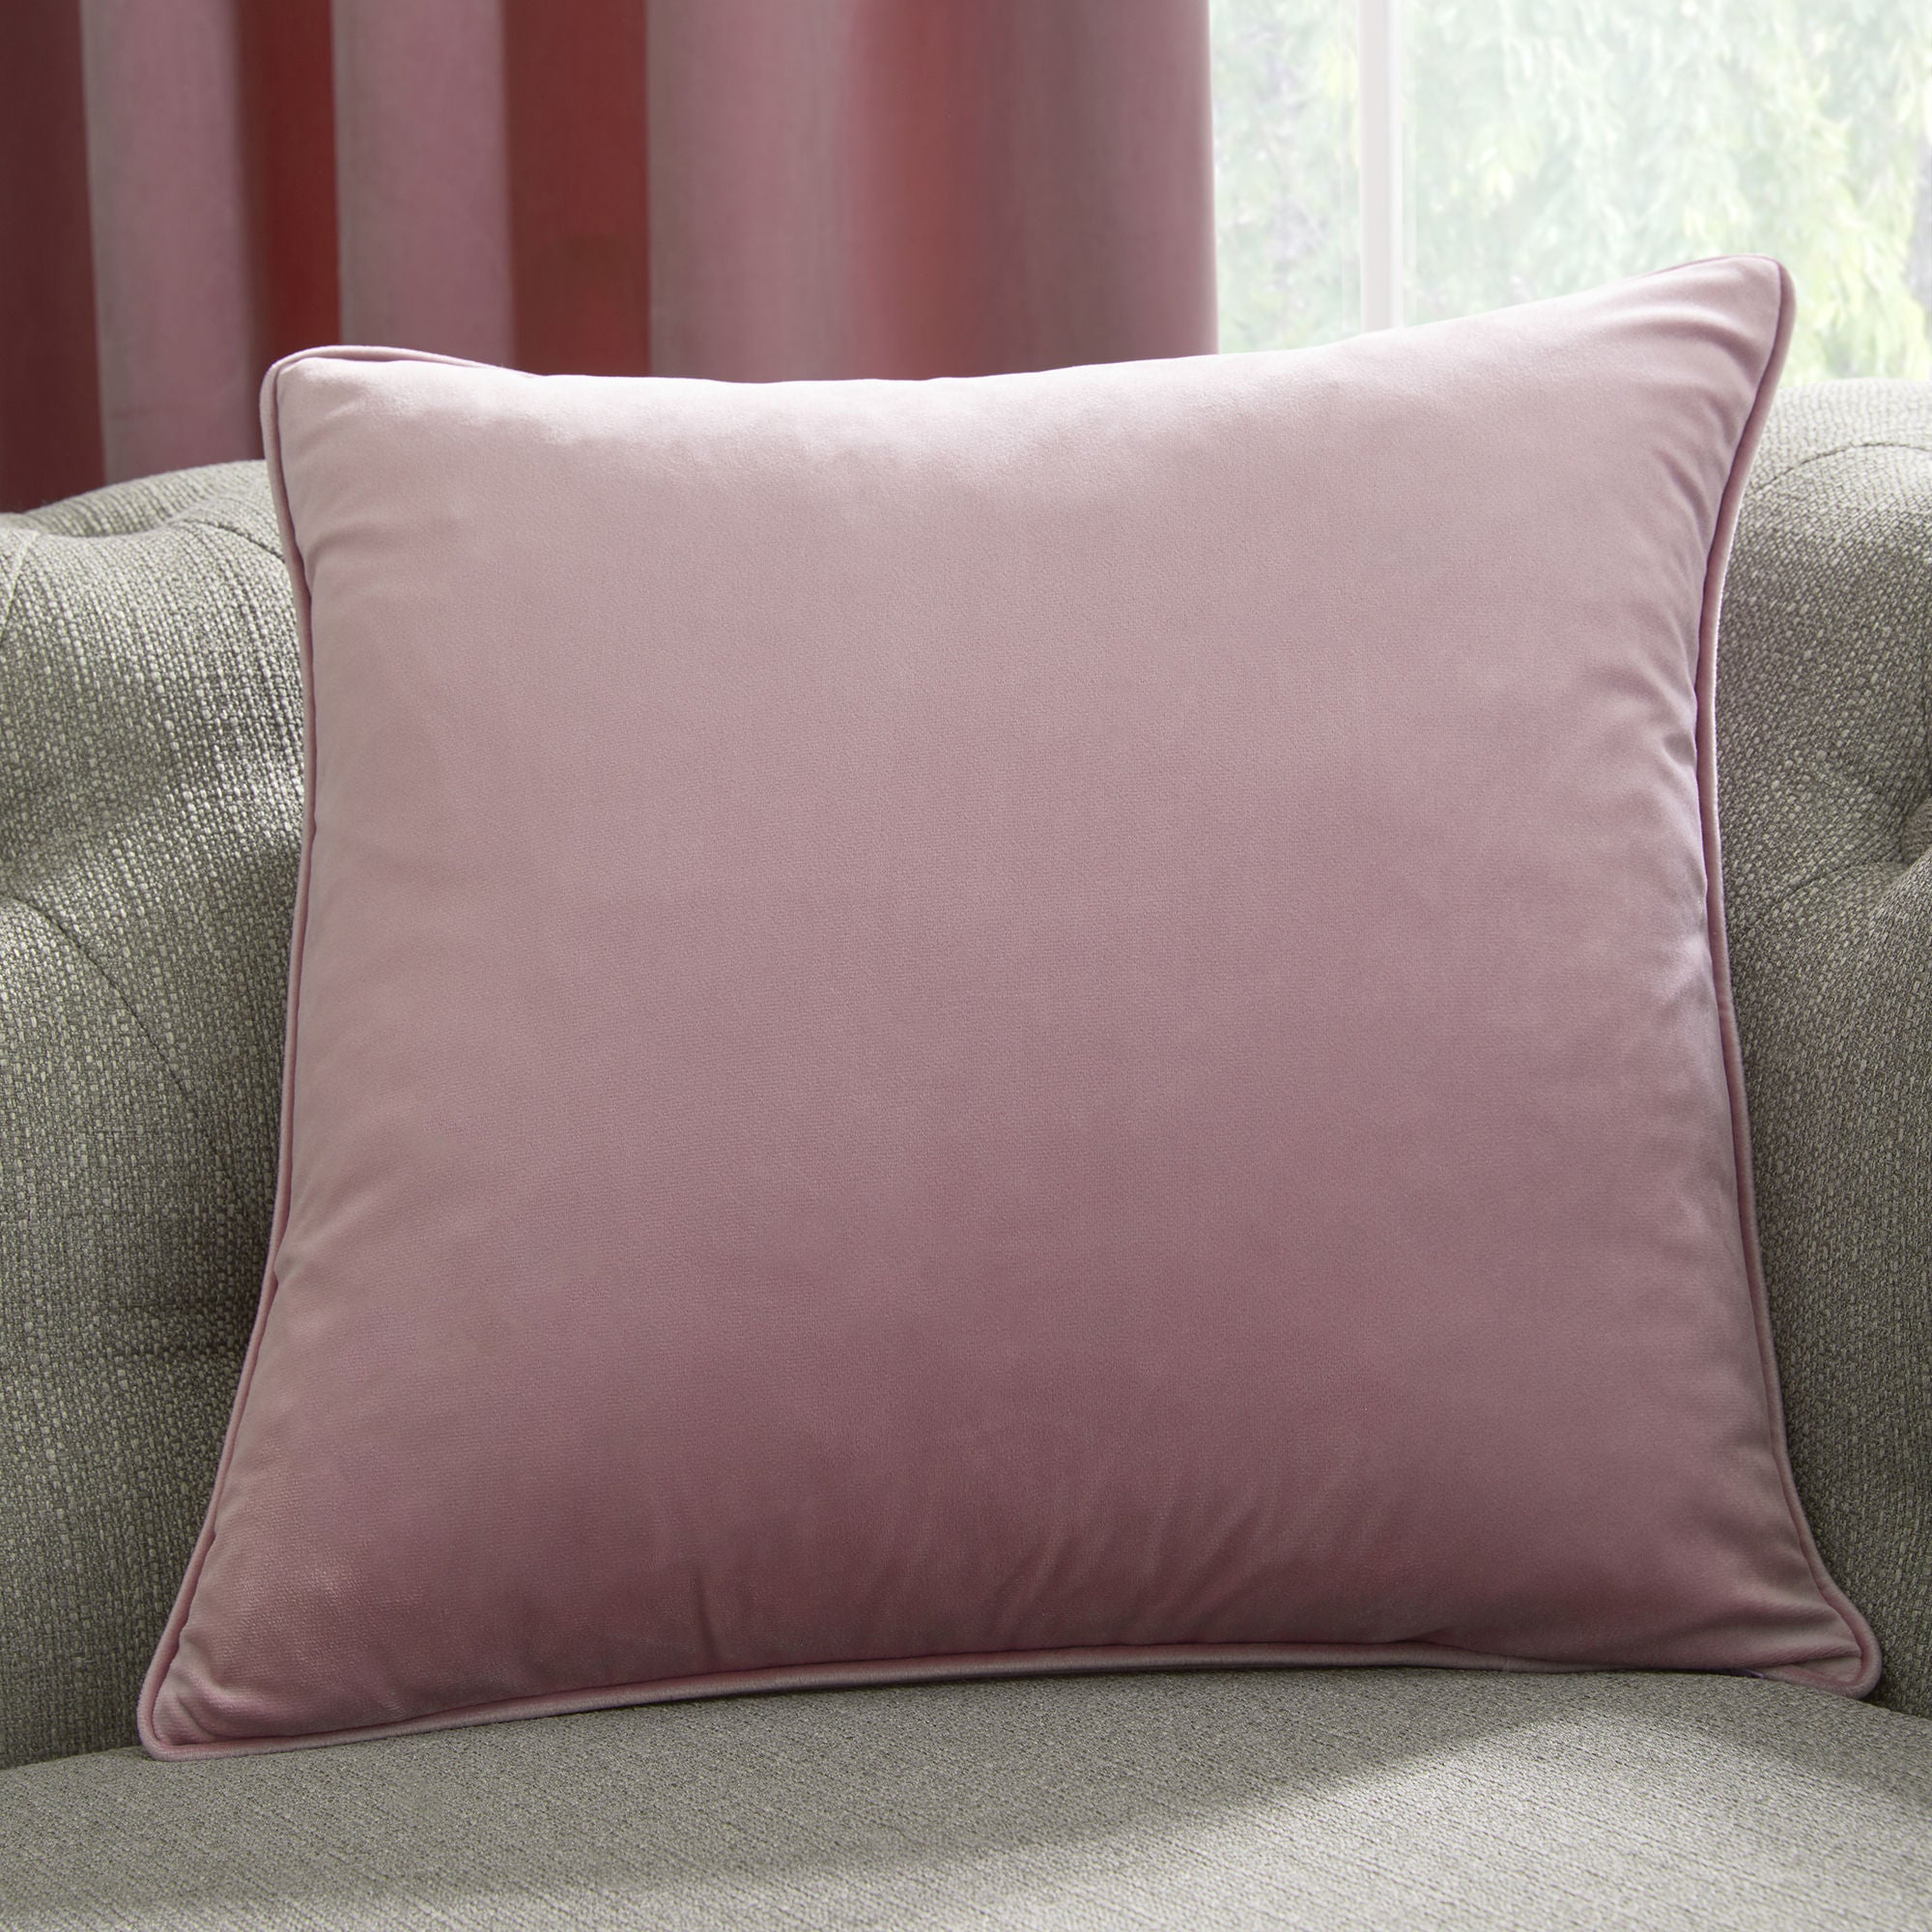 Montrose Cushion by Laurence Llewelyn-Bowen in Blush 43 x 43cm - Cushion - Laurence Llewelyn-Bowen